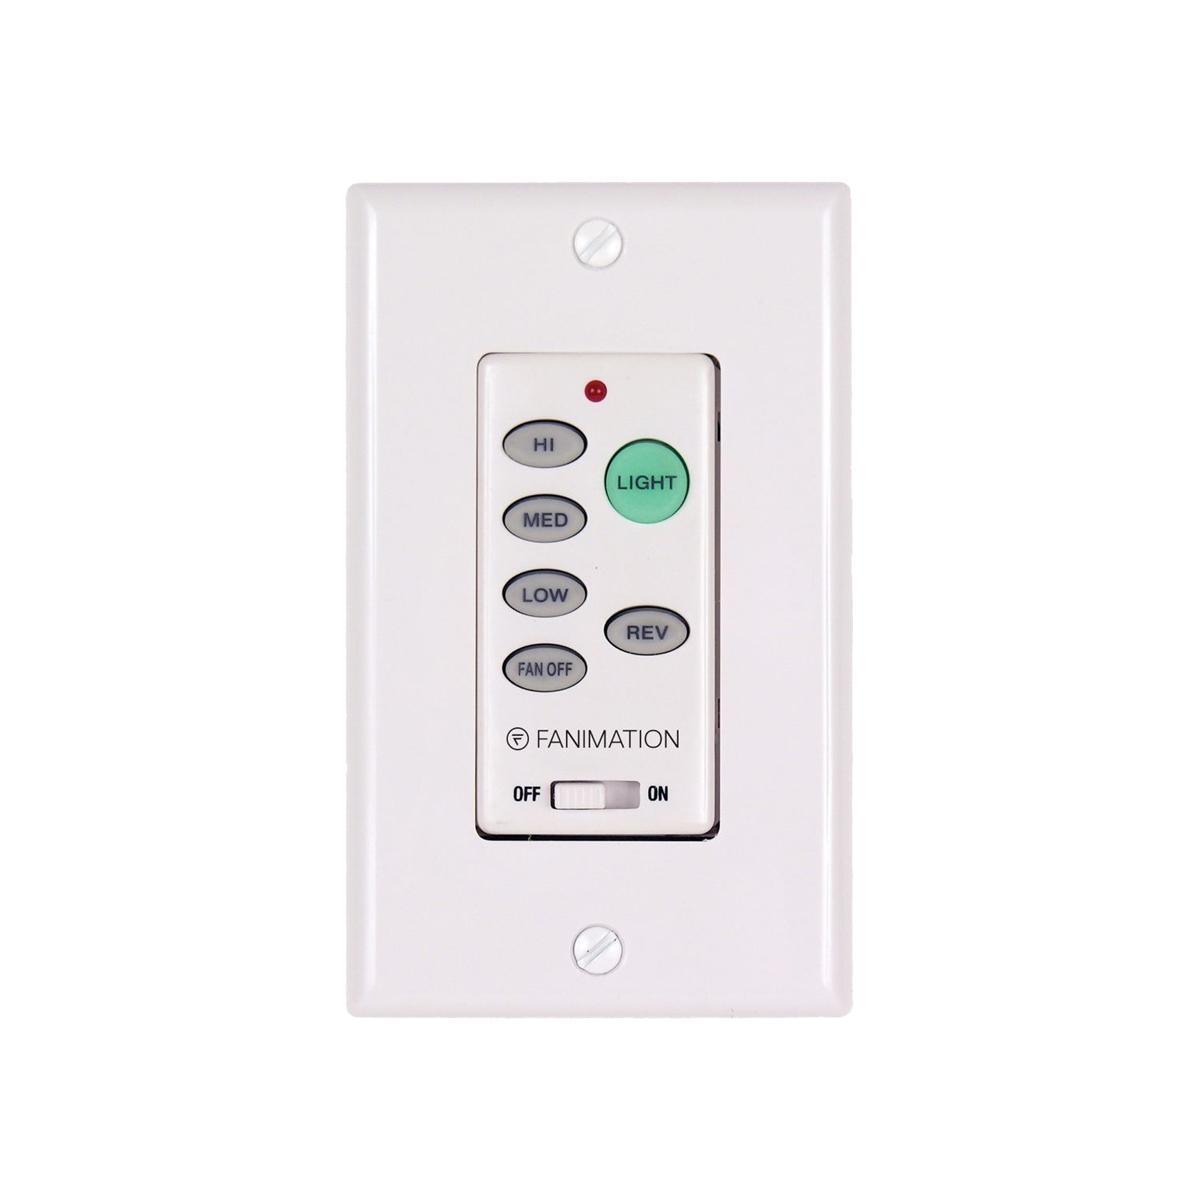 3-Speed Ceiling Fan And Light Wall Control Reversing Switch, White Finish